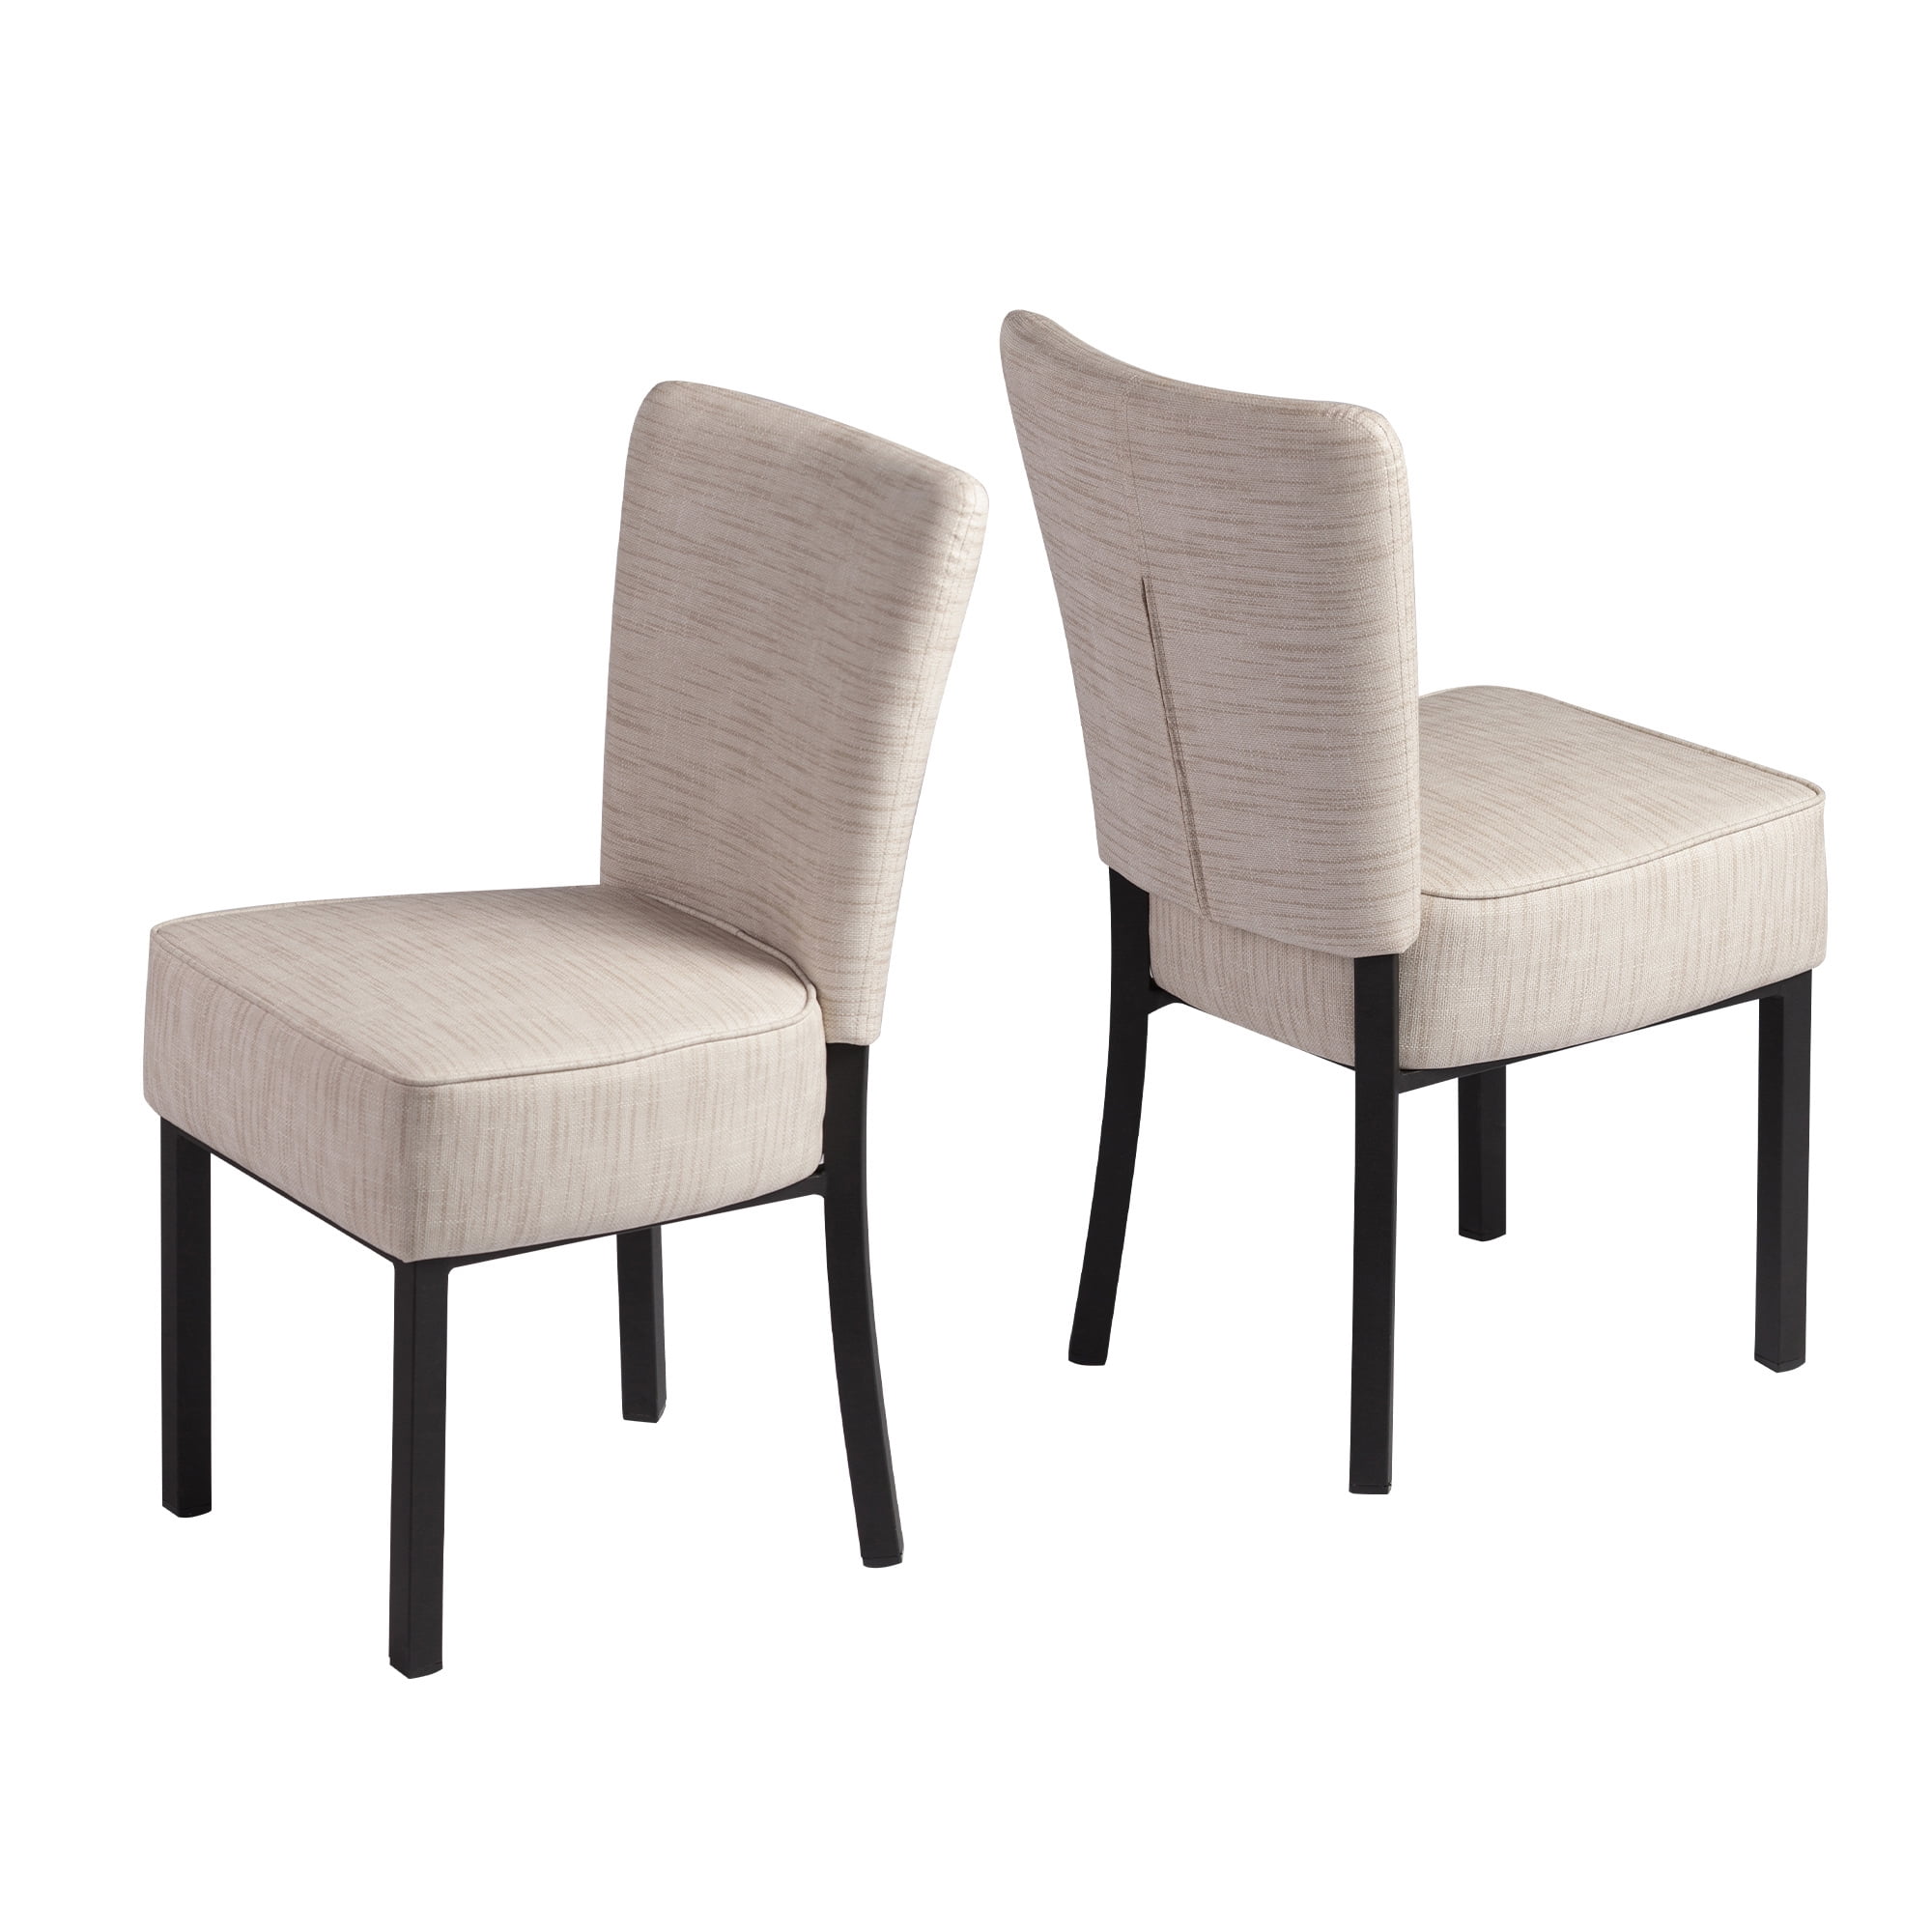 KARMAS PRODUCT Upholstered Dining Chairs Set of 2 PU Leather Modern Dining Room Chairs for Home Kitchen Living Room Bedroom, Cream